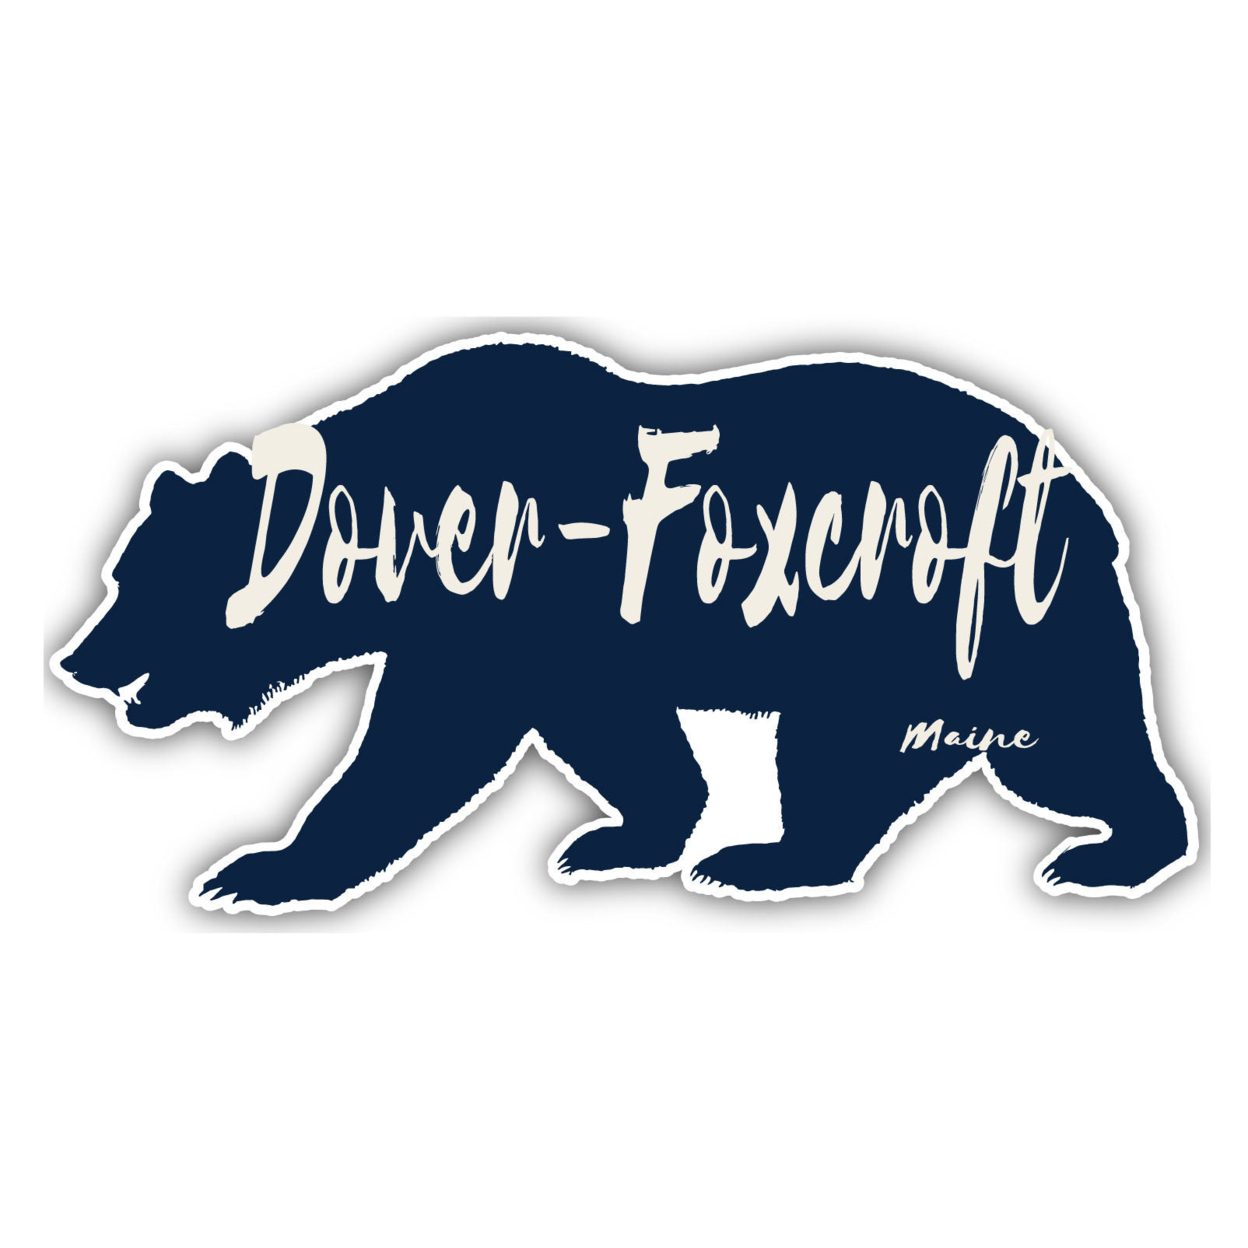 Dover-Foxcroft Maine Souvenir Decorative Stickers (Choose Theme And Size) - 4-Pack, 12-Inch, Bear